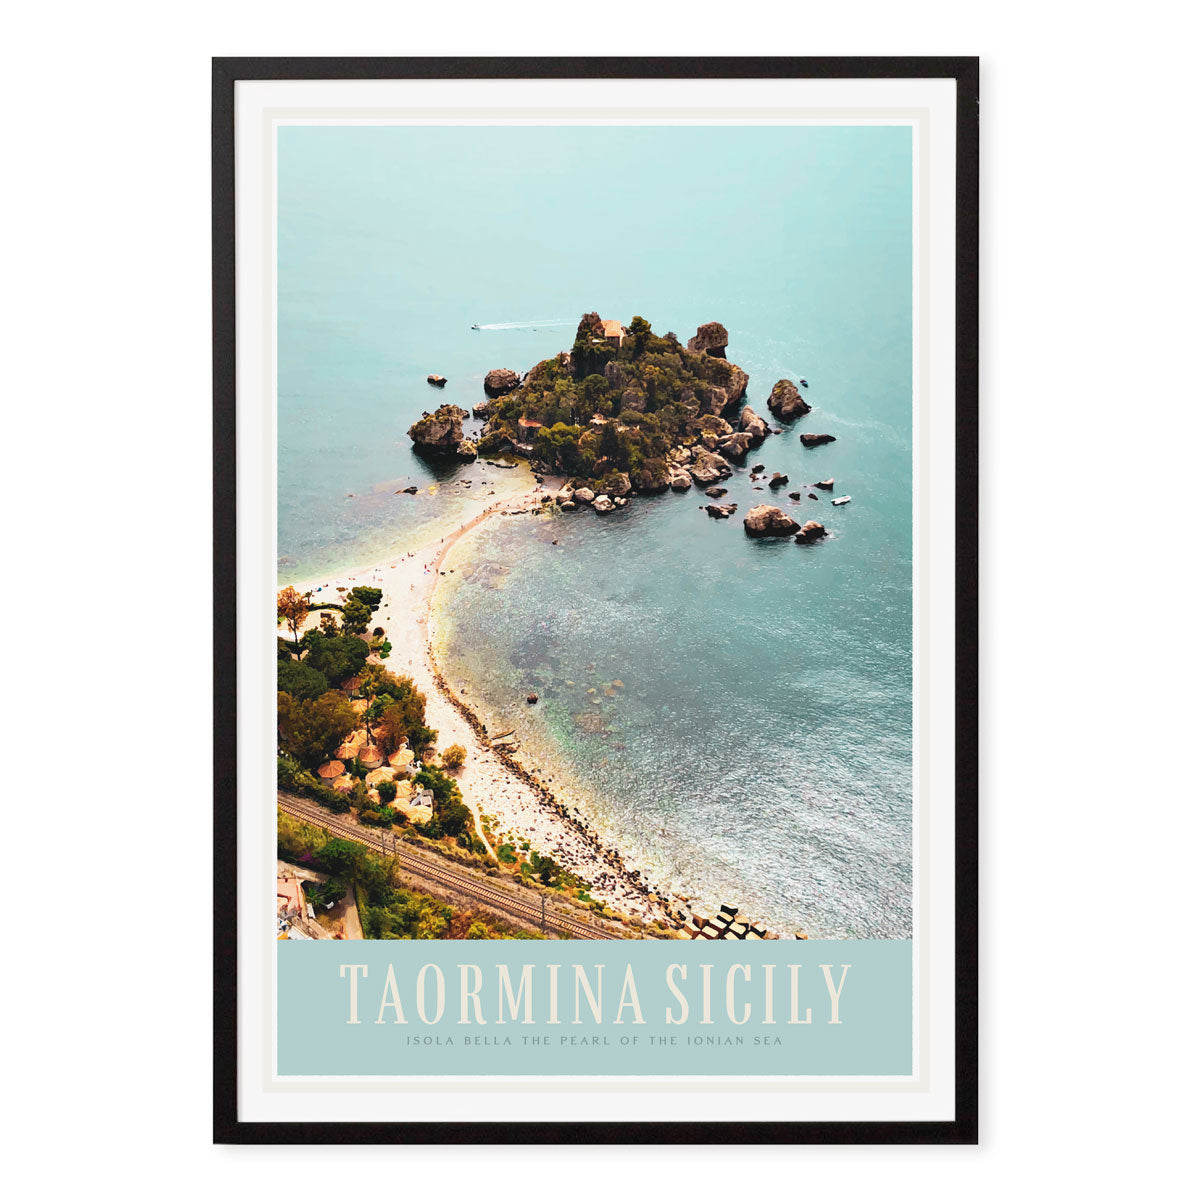 Taormina Sicily vintage retro travel style poster print in black frame by places we luv